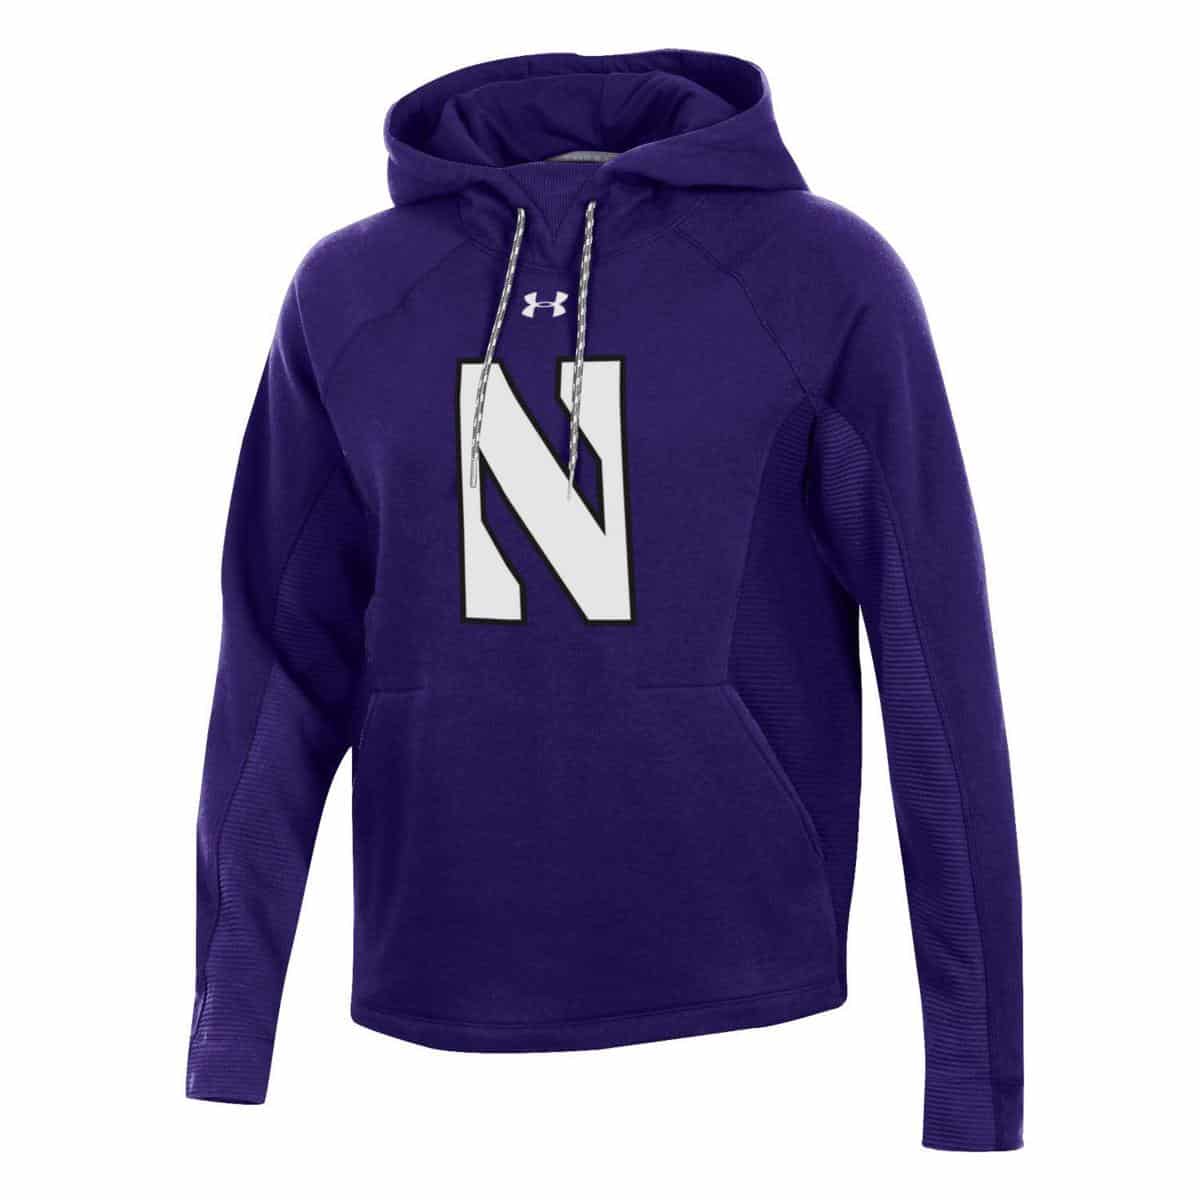 Northwestern Wildcats: Buy Under Armour Hooded Sweatshirts and more |  Campus Gear Online | Evanston and Online